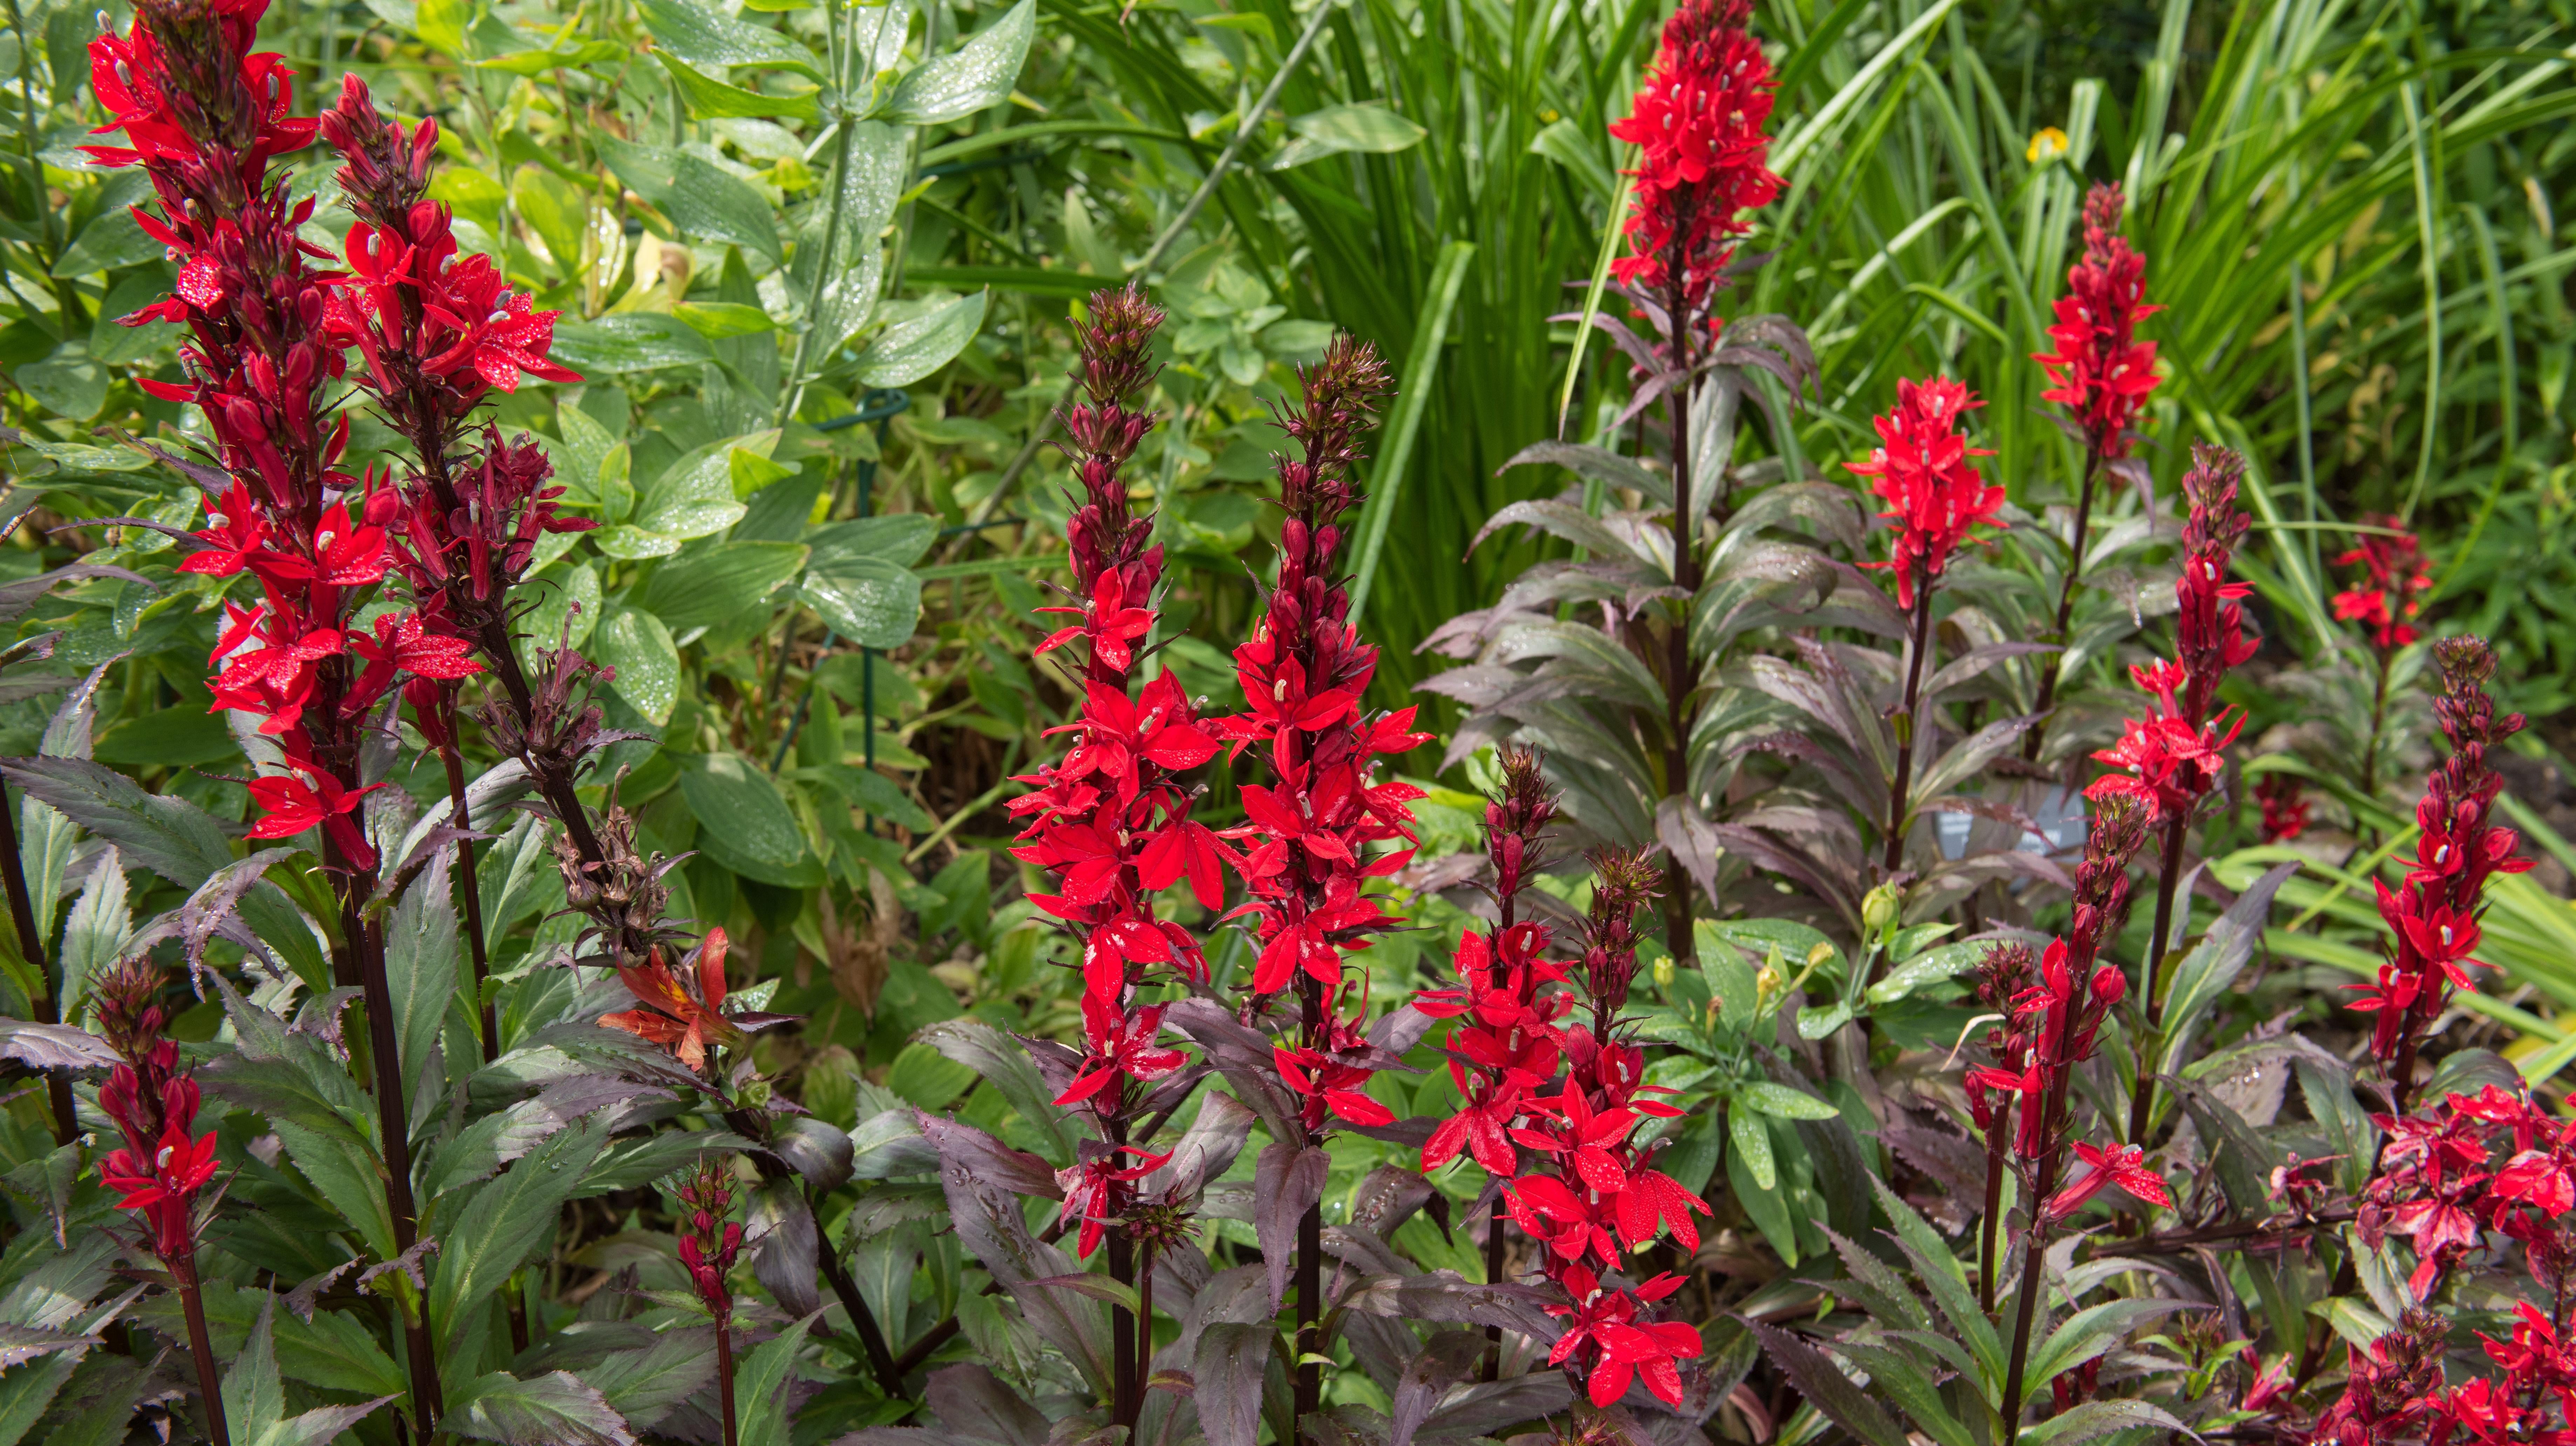 These Flowering Plants Are Able to Grow in Wet, Poorly Drained Soil